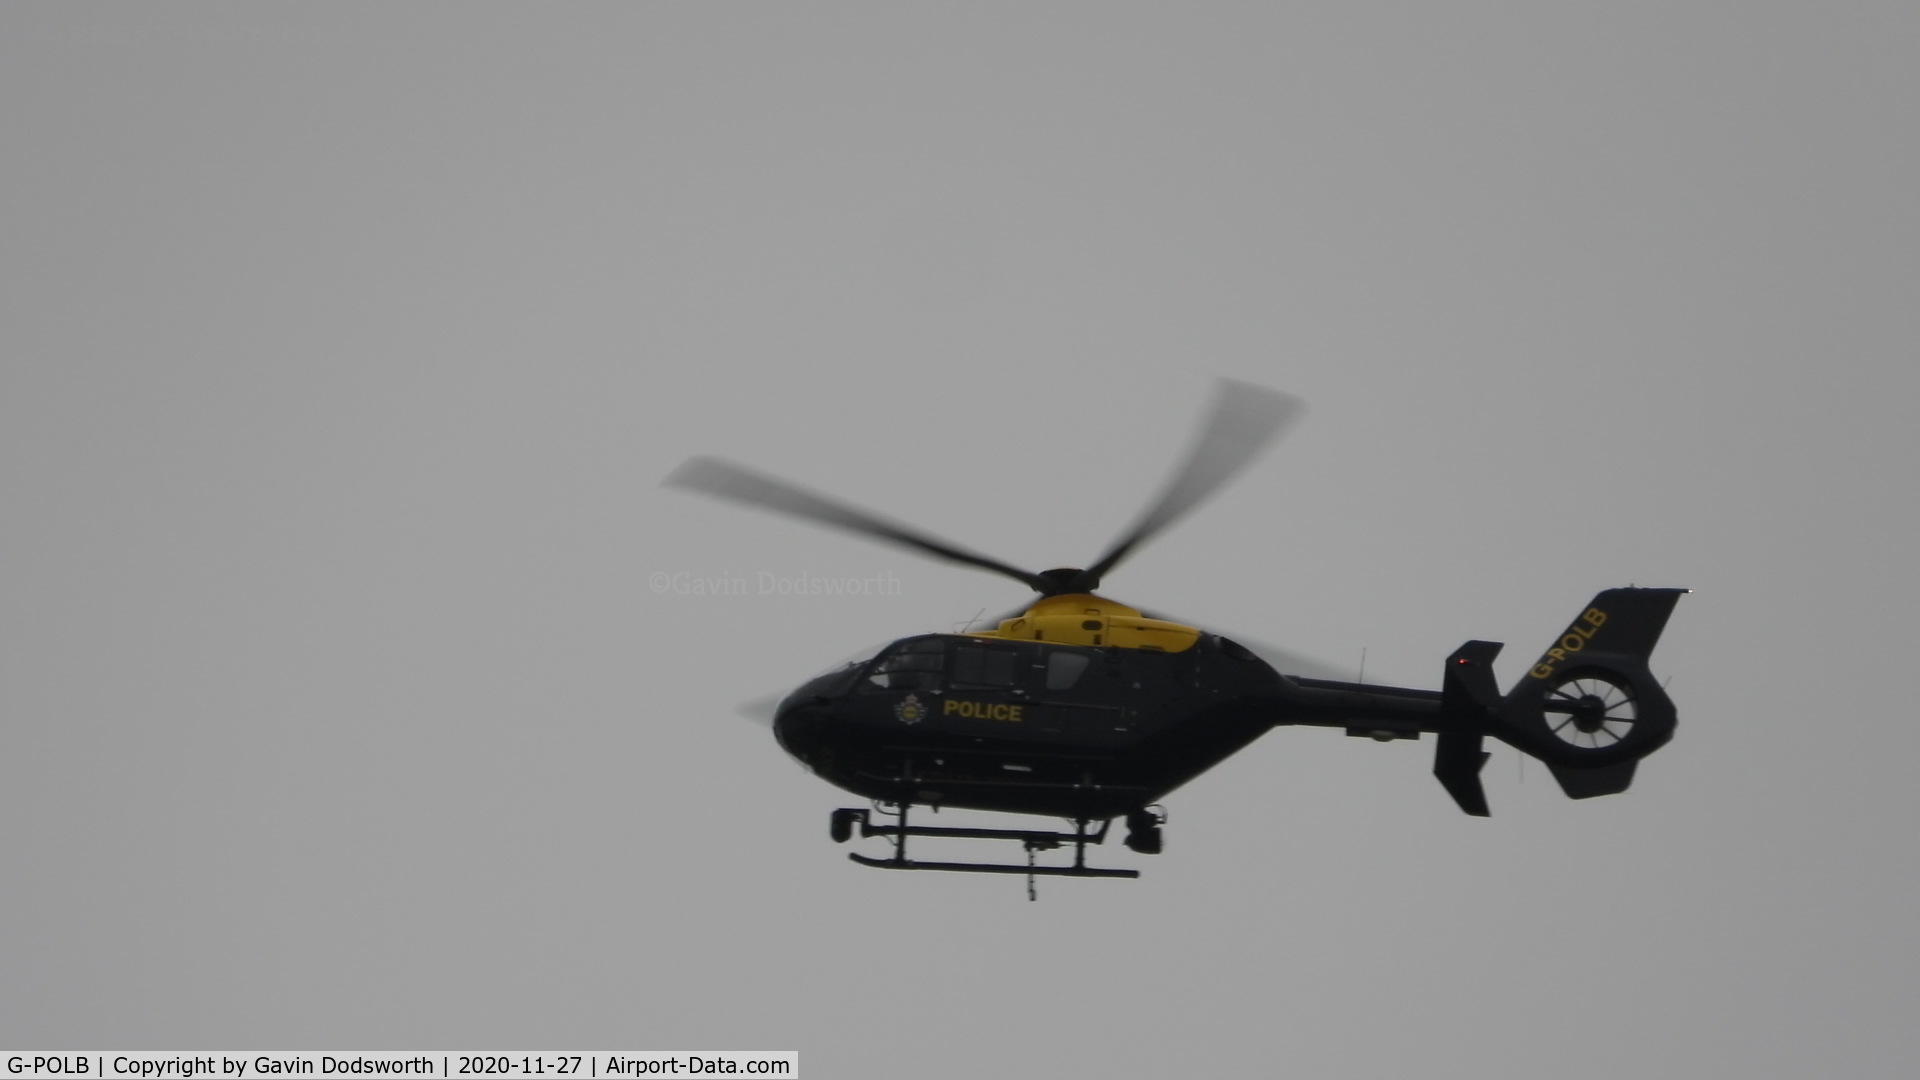 G-POLB, 2003 Eurocopter EC-135T-2 C/N 0283, G-POLB from NPAS Carr Gate working in the Darlington area on Friday 27th November 2020